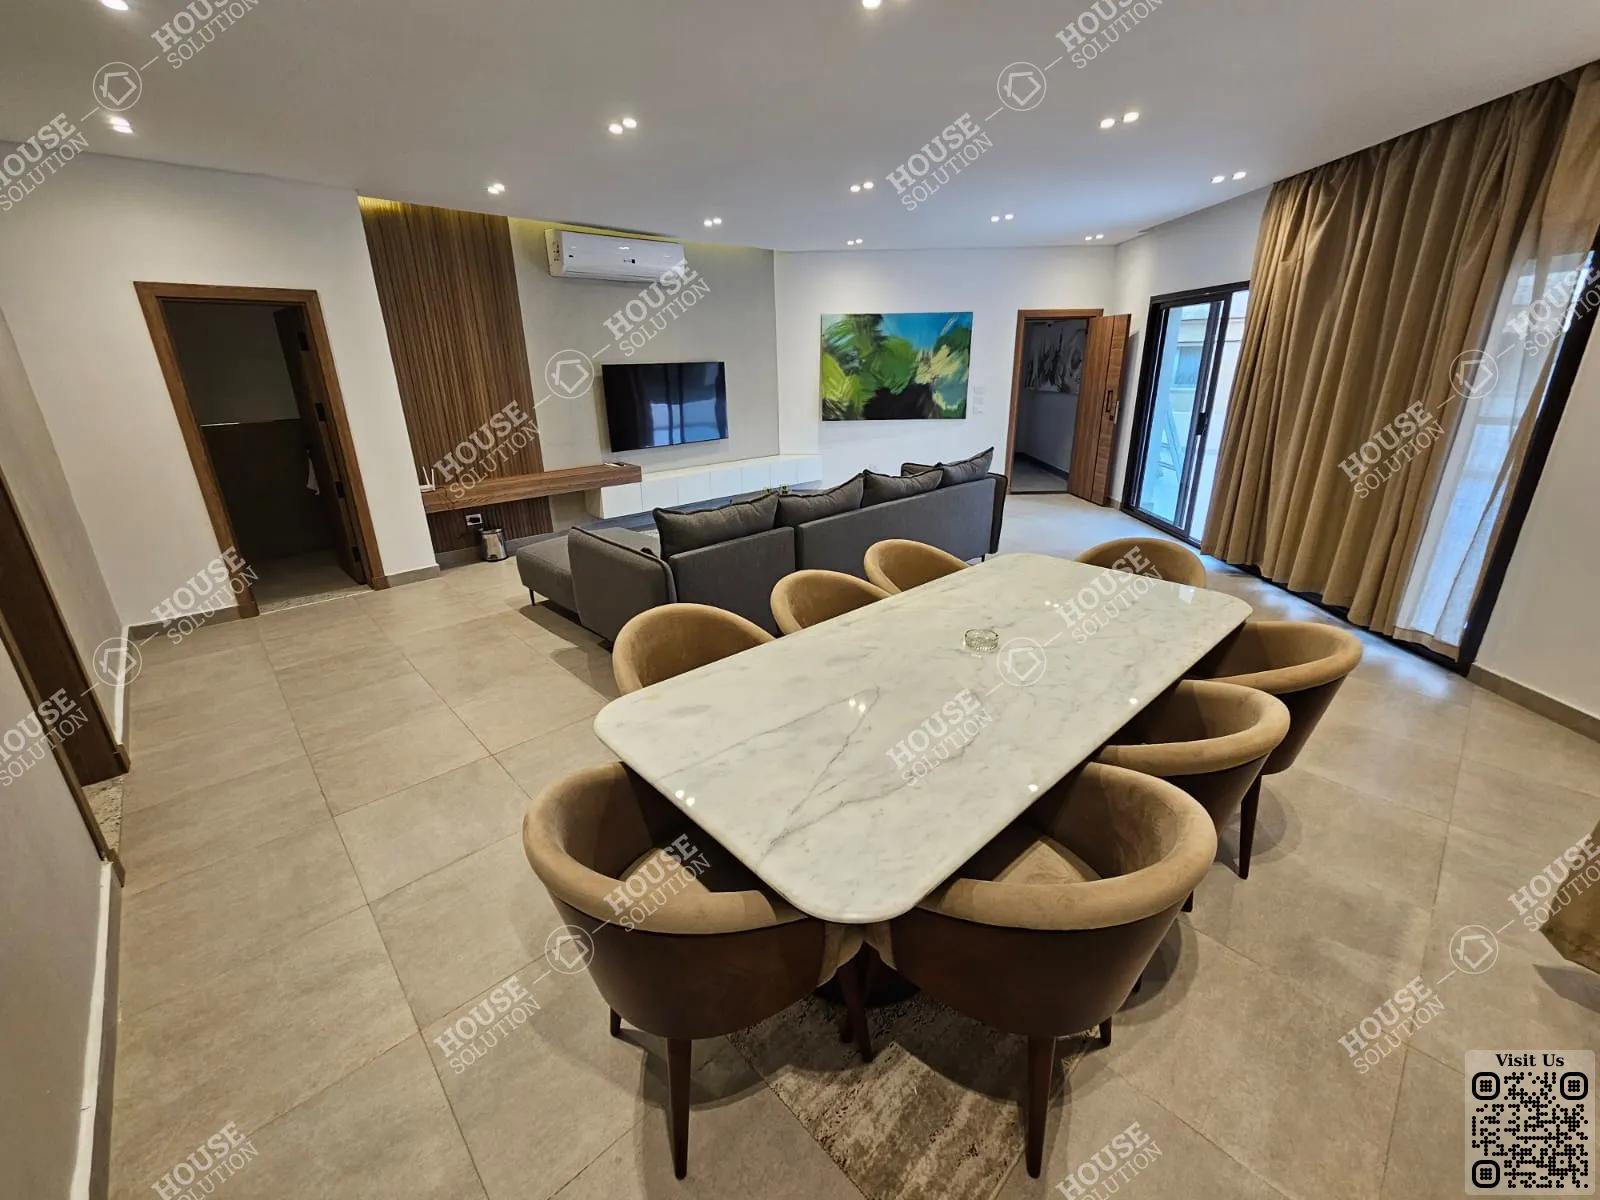 RECEPTION  @ Apartments For Rent In Maadi Maadi Sarayat Area: 165 m² consists of 3 Bedrooms 4 Bathrooms Modern furnished 5 stars #5790-1